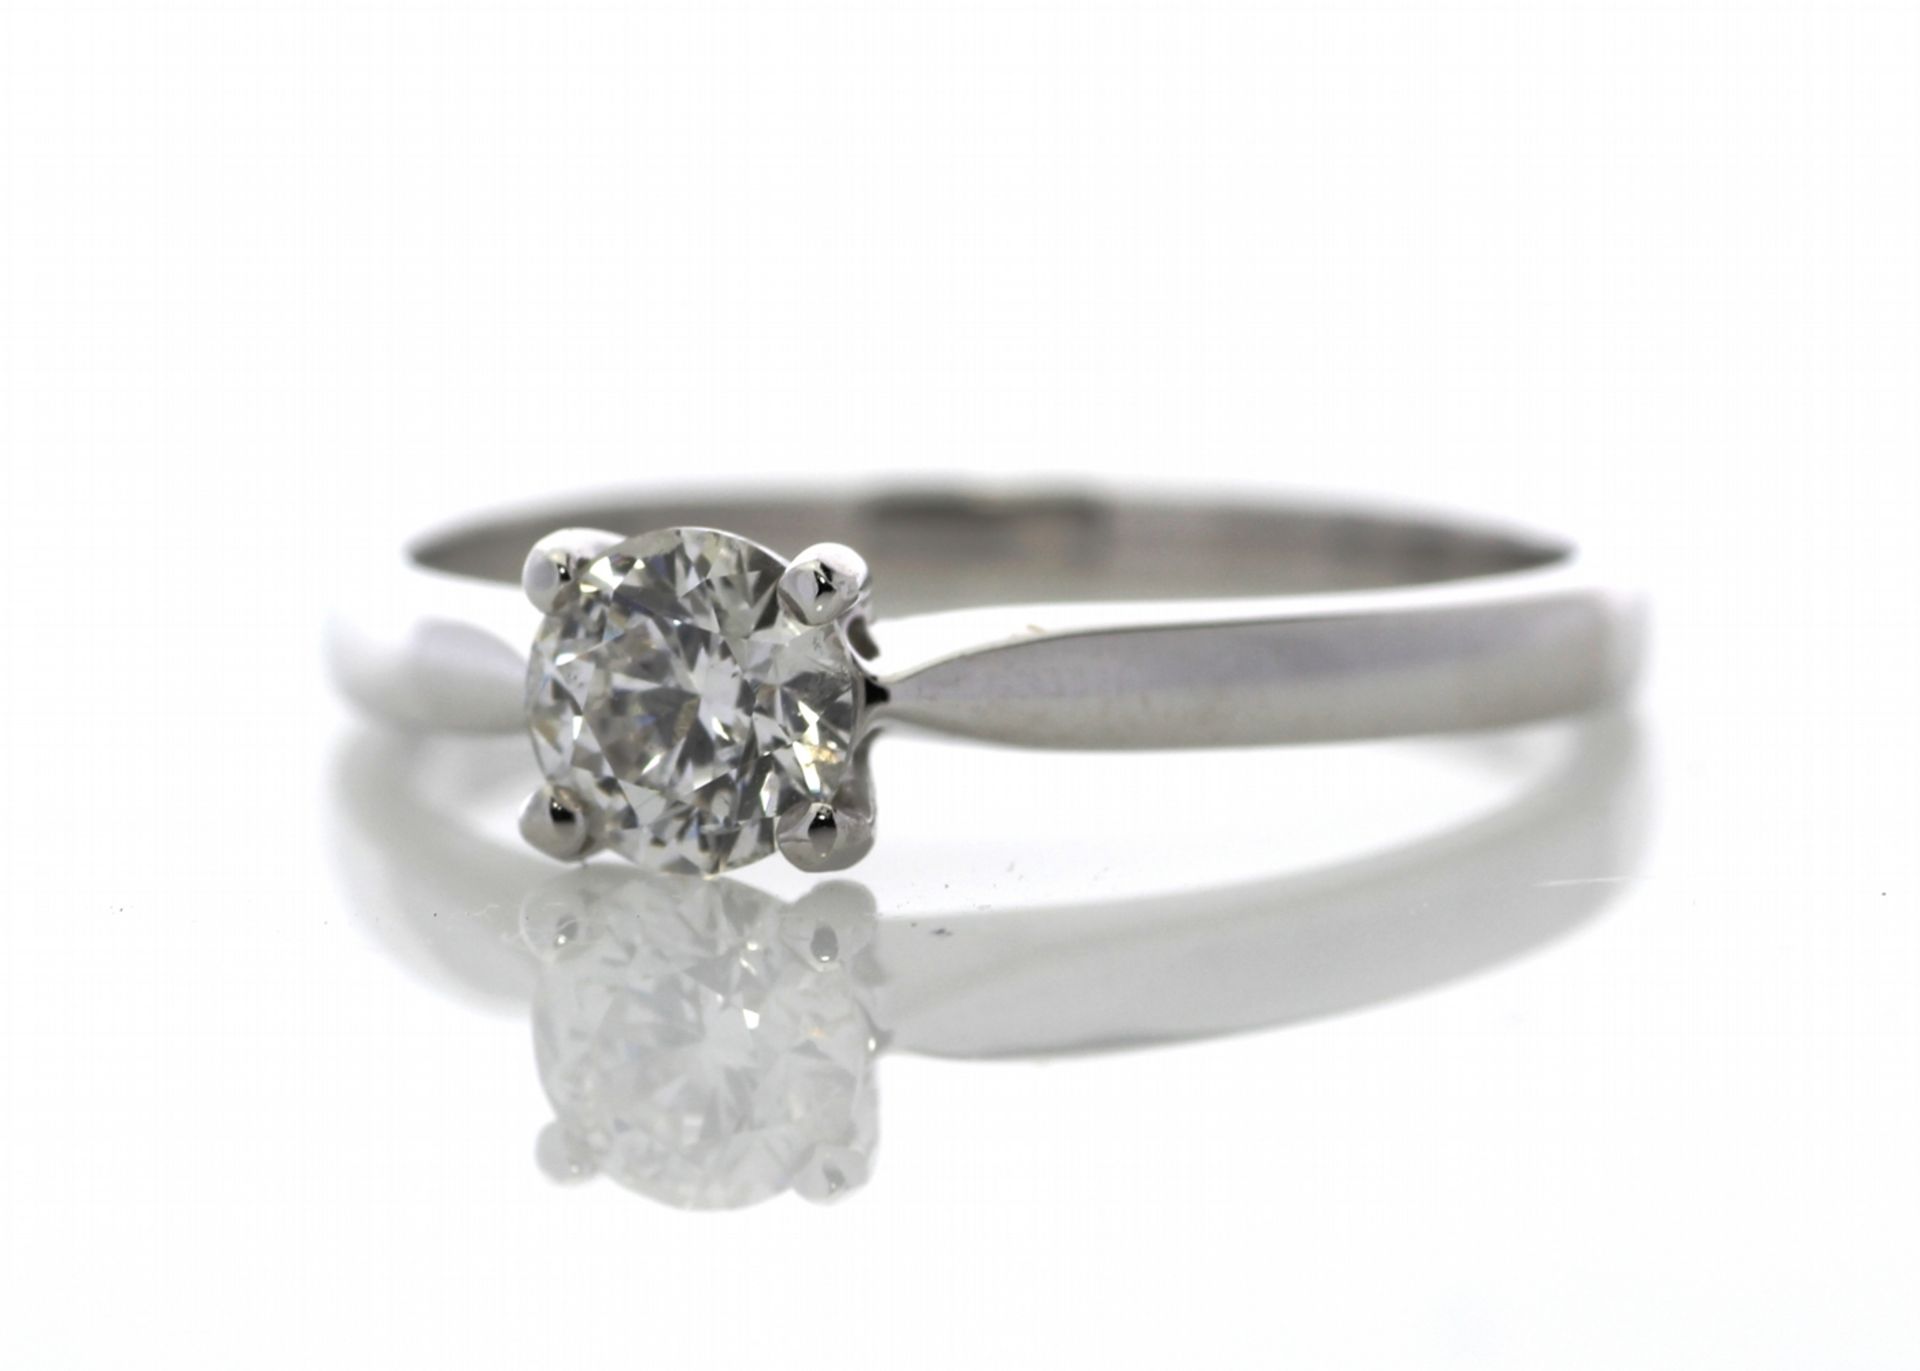 18ct White Gold Solitaire Diamond Ring 0.50 Carats - Image 2 of 6